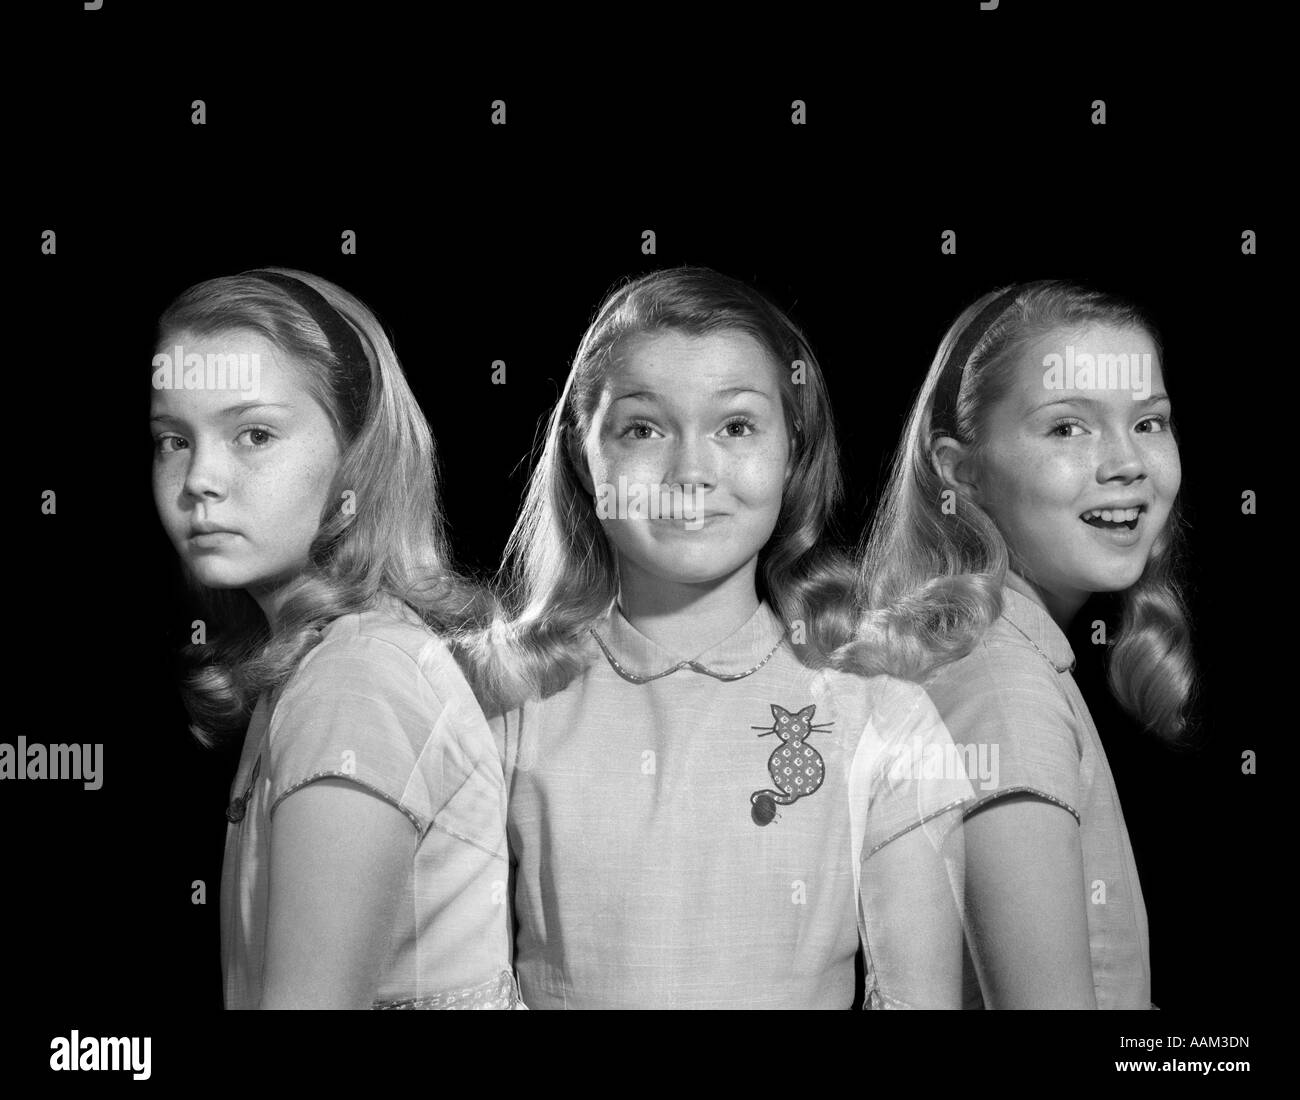 1950s 1960s MULTIPLE EXPOSURE GIRL GOING FROM HAPPY TO SAD THREE FACIAL EXPRESSIONS LOOKING AT CAMERA Stock Photo